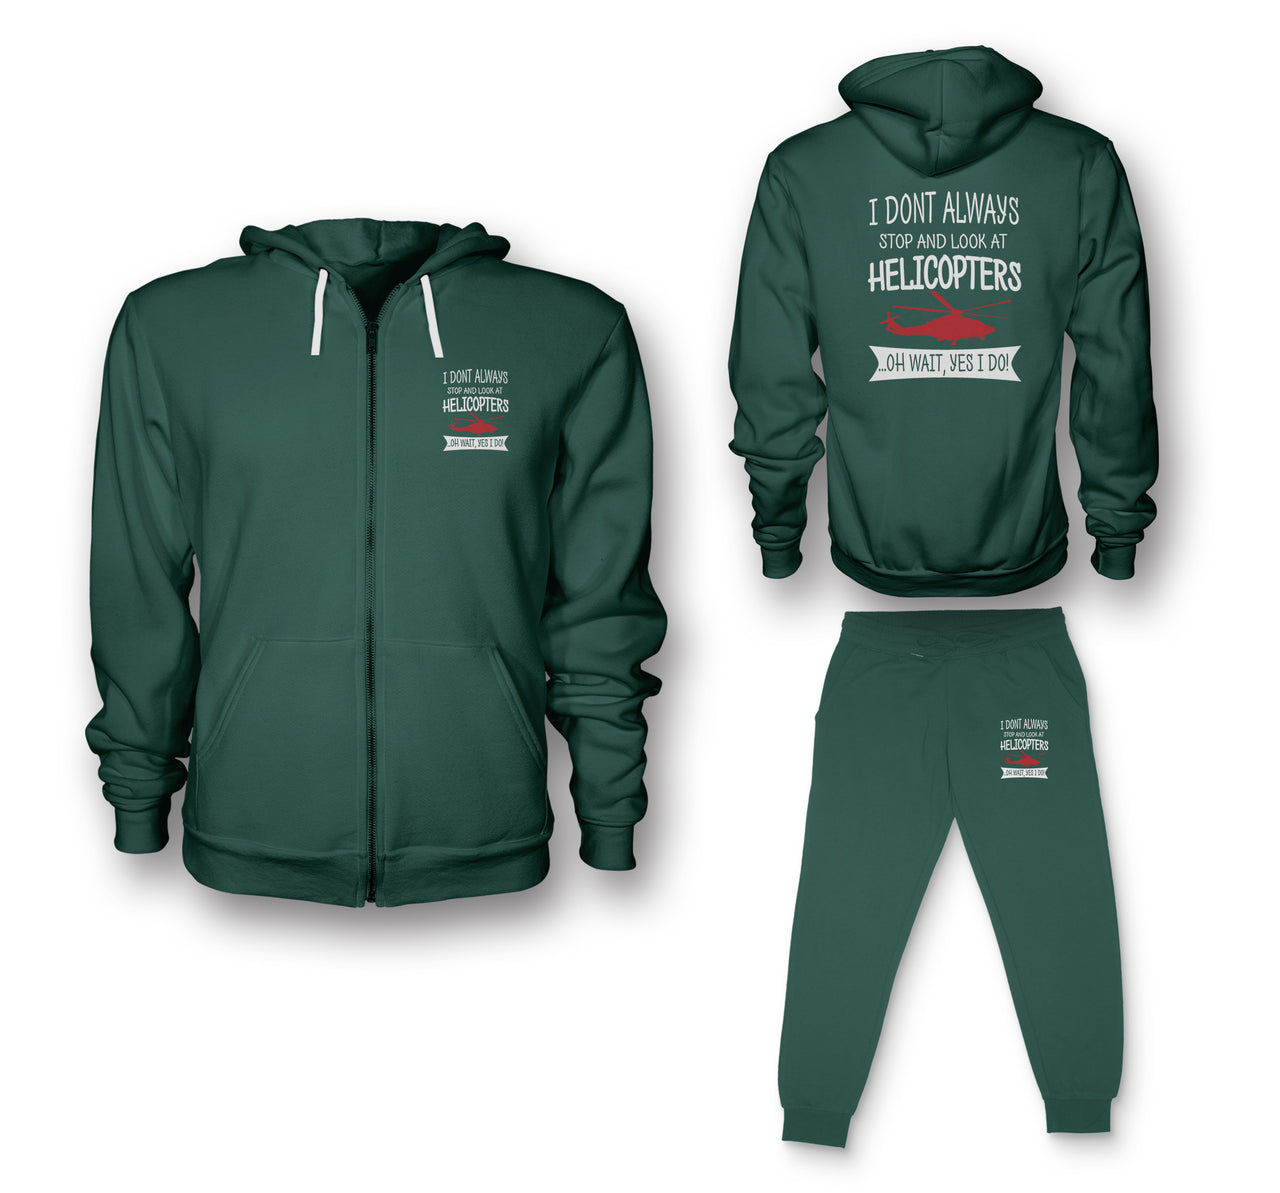 I Don't Always Stop and Look at Helicopters Designed Zipped Hoodies & Sweatpants Set